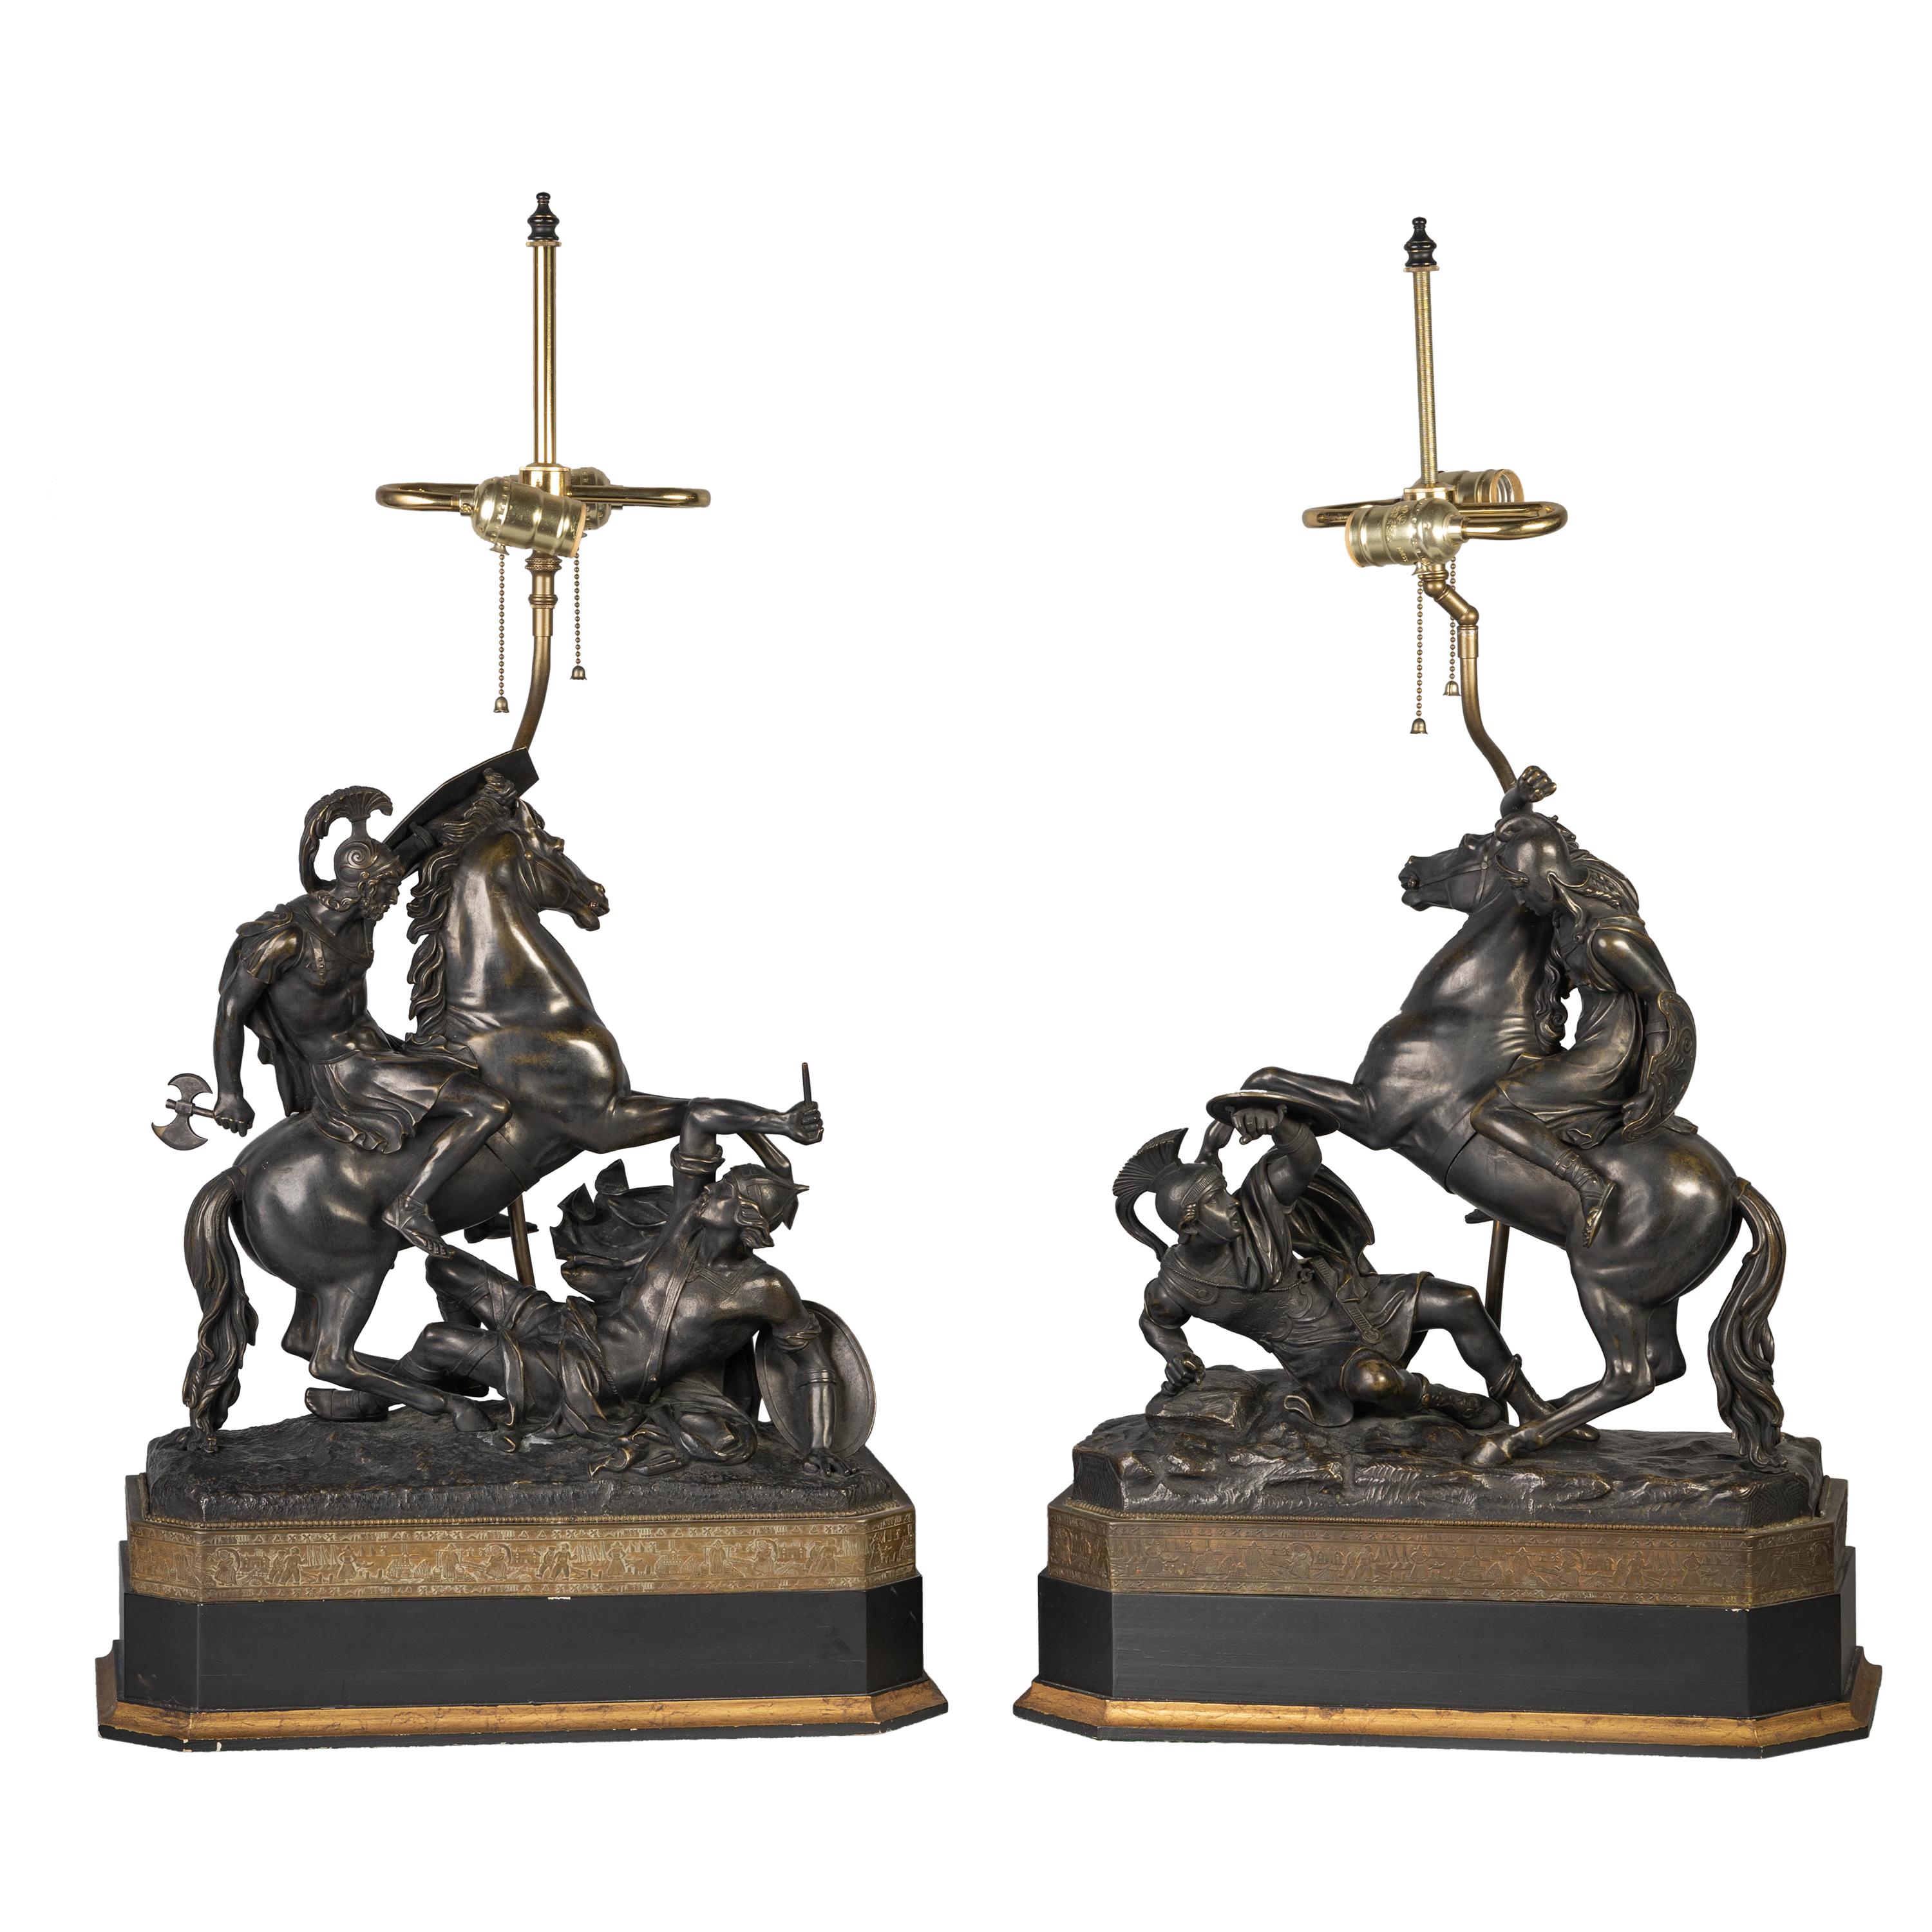 Pair of French Patinated Bronze Roman Equestrian Warrior Groups, 19th Century For Sale